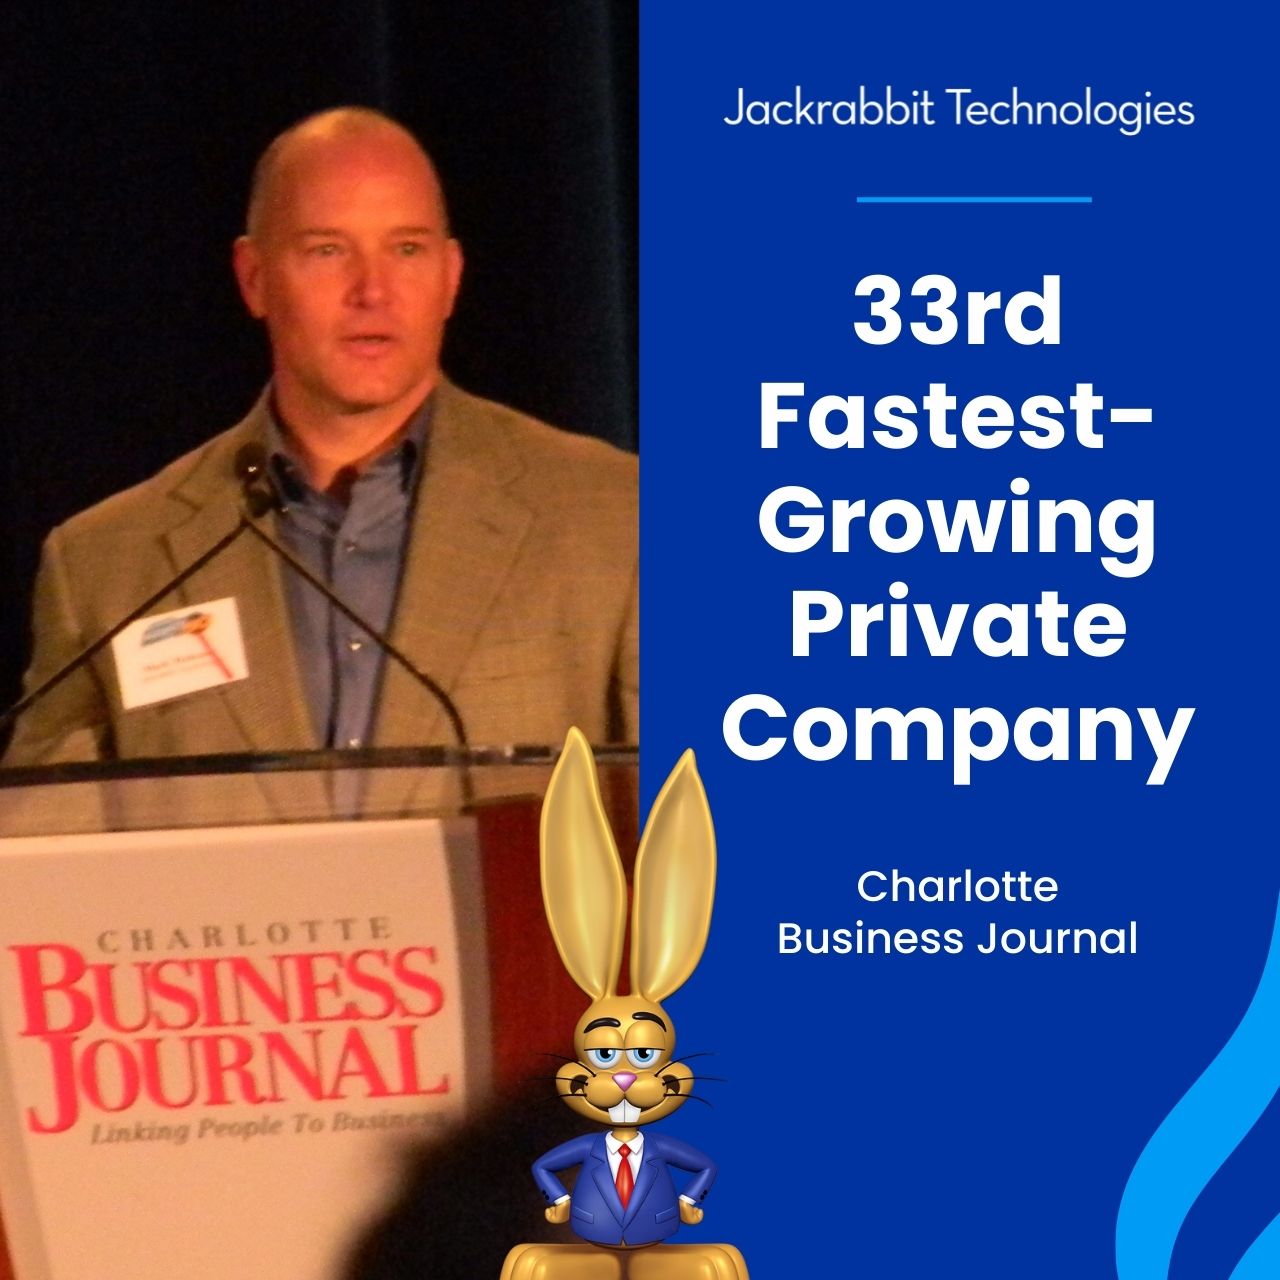 jackrabbit recognized as 33rd fastest growing company